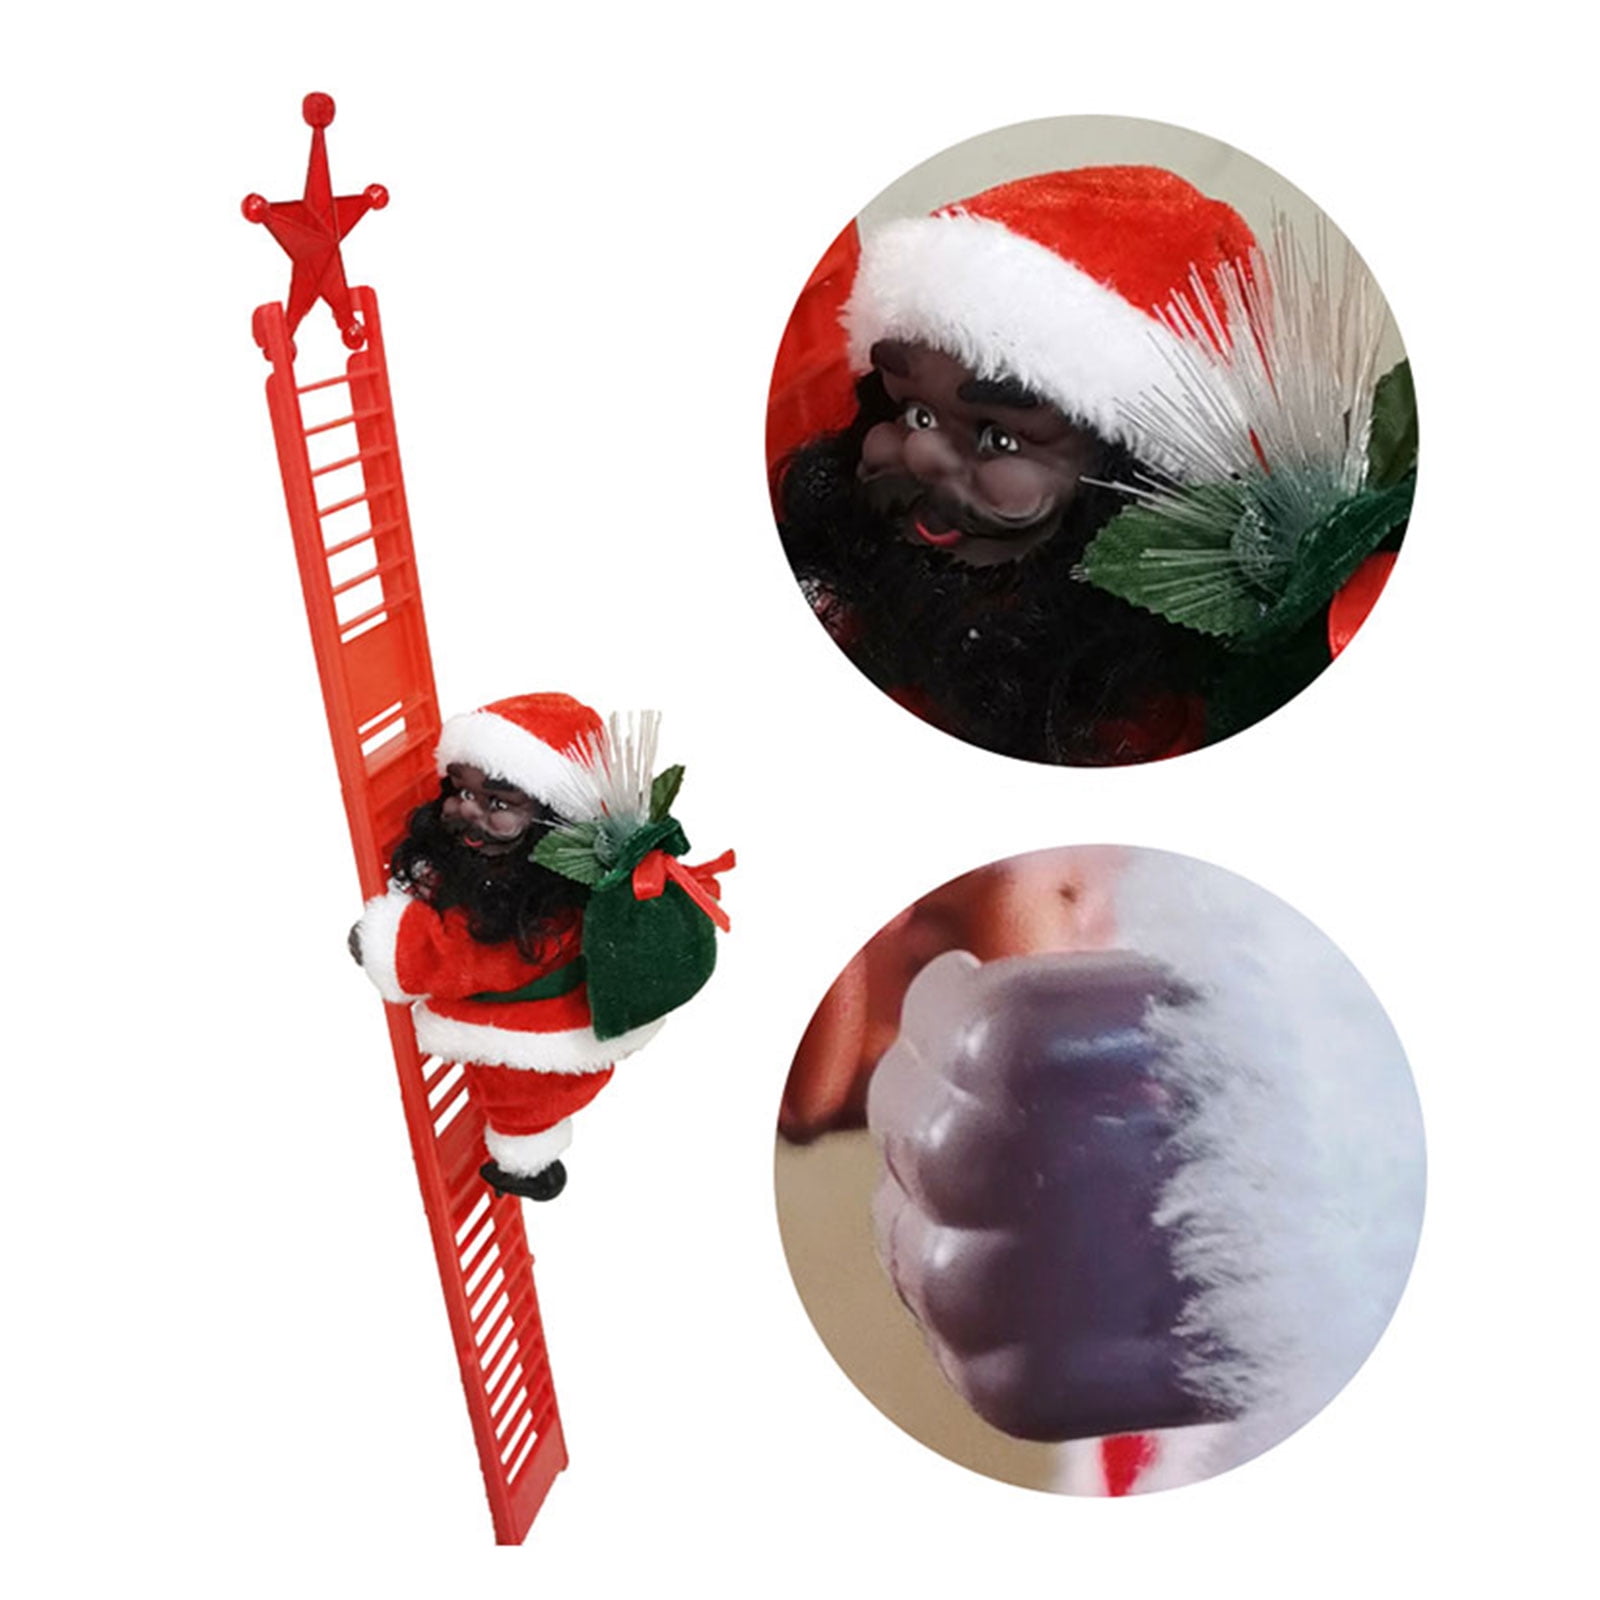 Details about   Electric Climbing Ladder Santa Claus Doll Party Music Figurine Decor Gift Toys 